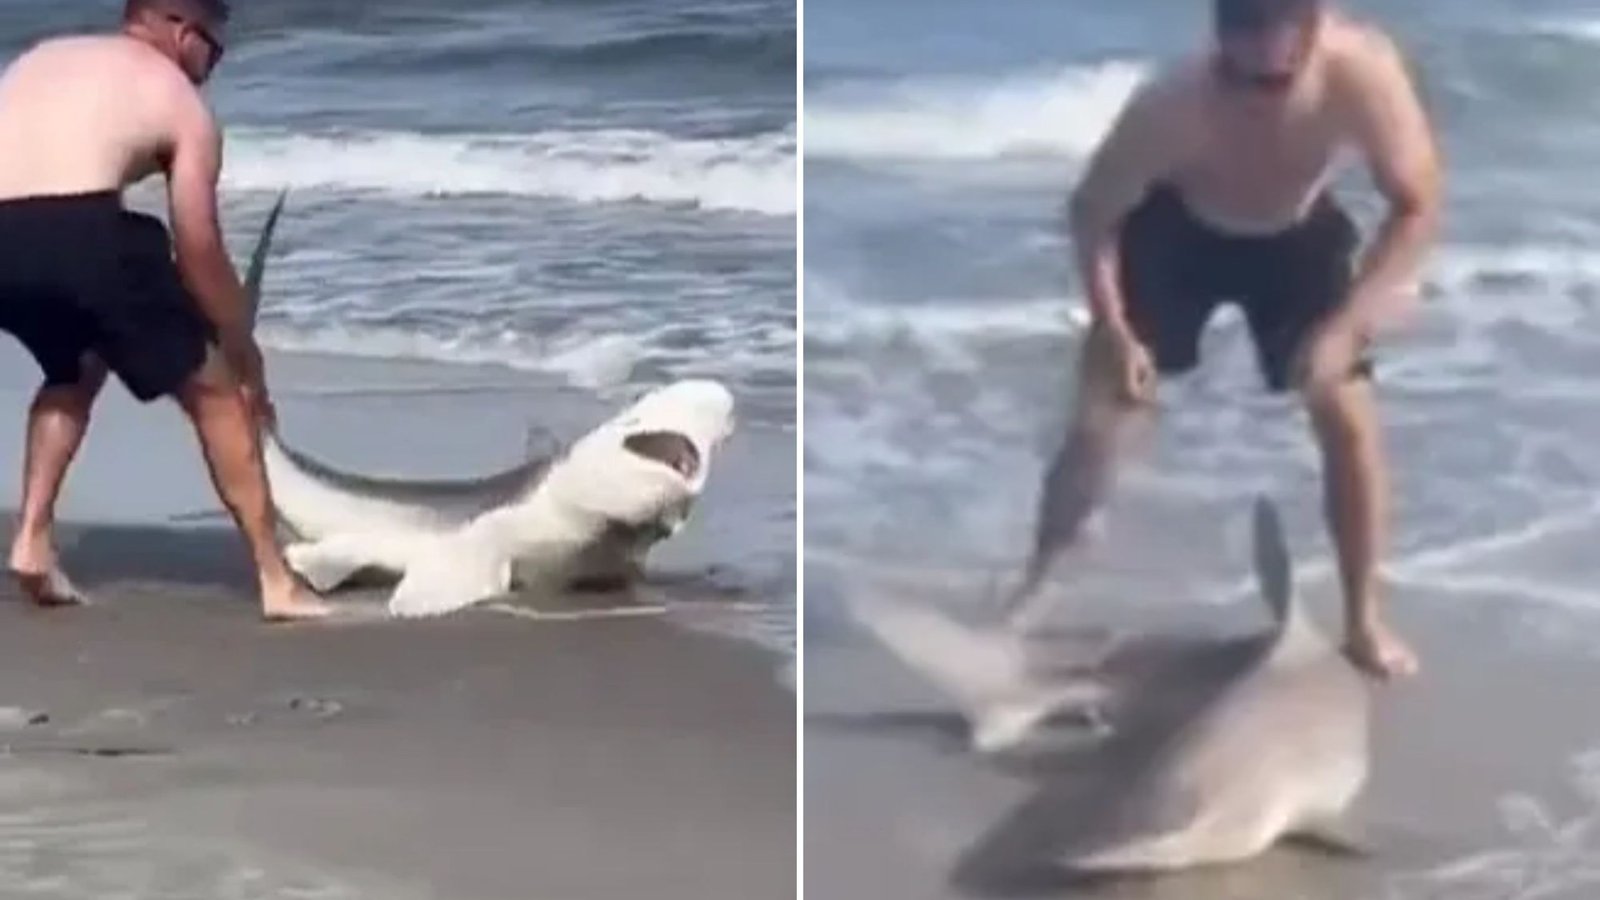 Watch moment beachgoer wrestles with shark before grabbing it by TAIL & hurling it back into sea